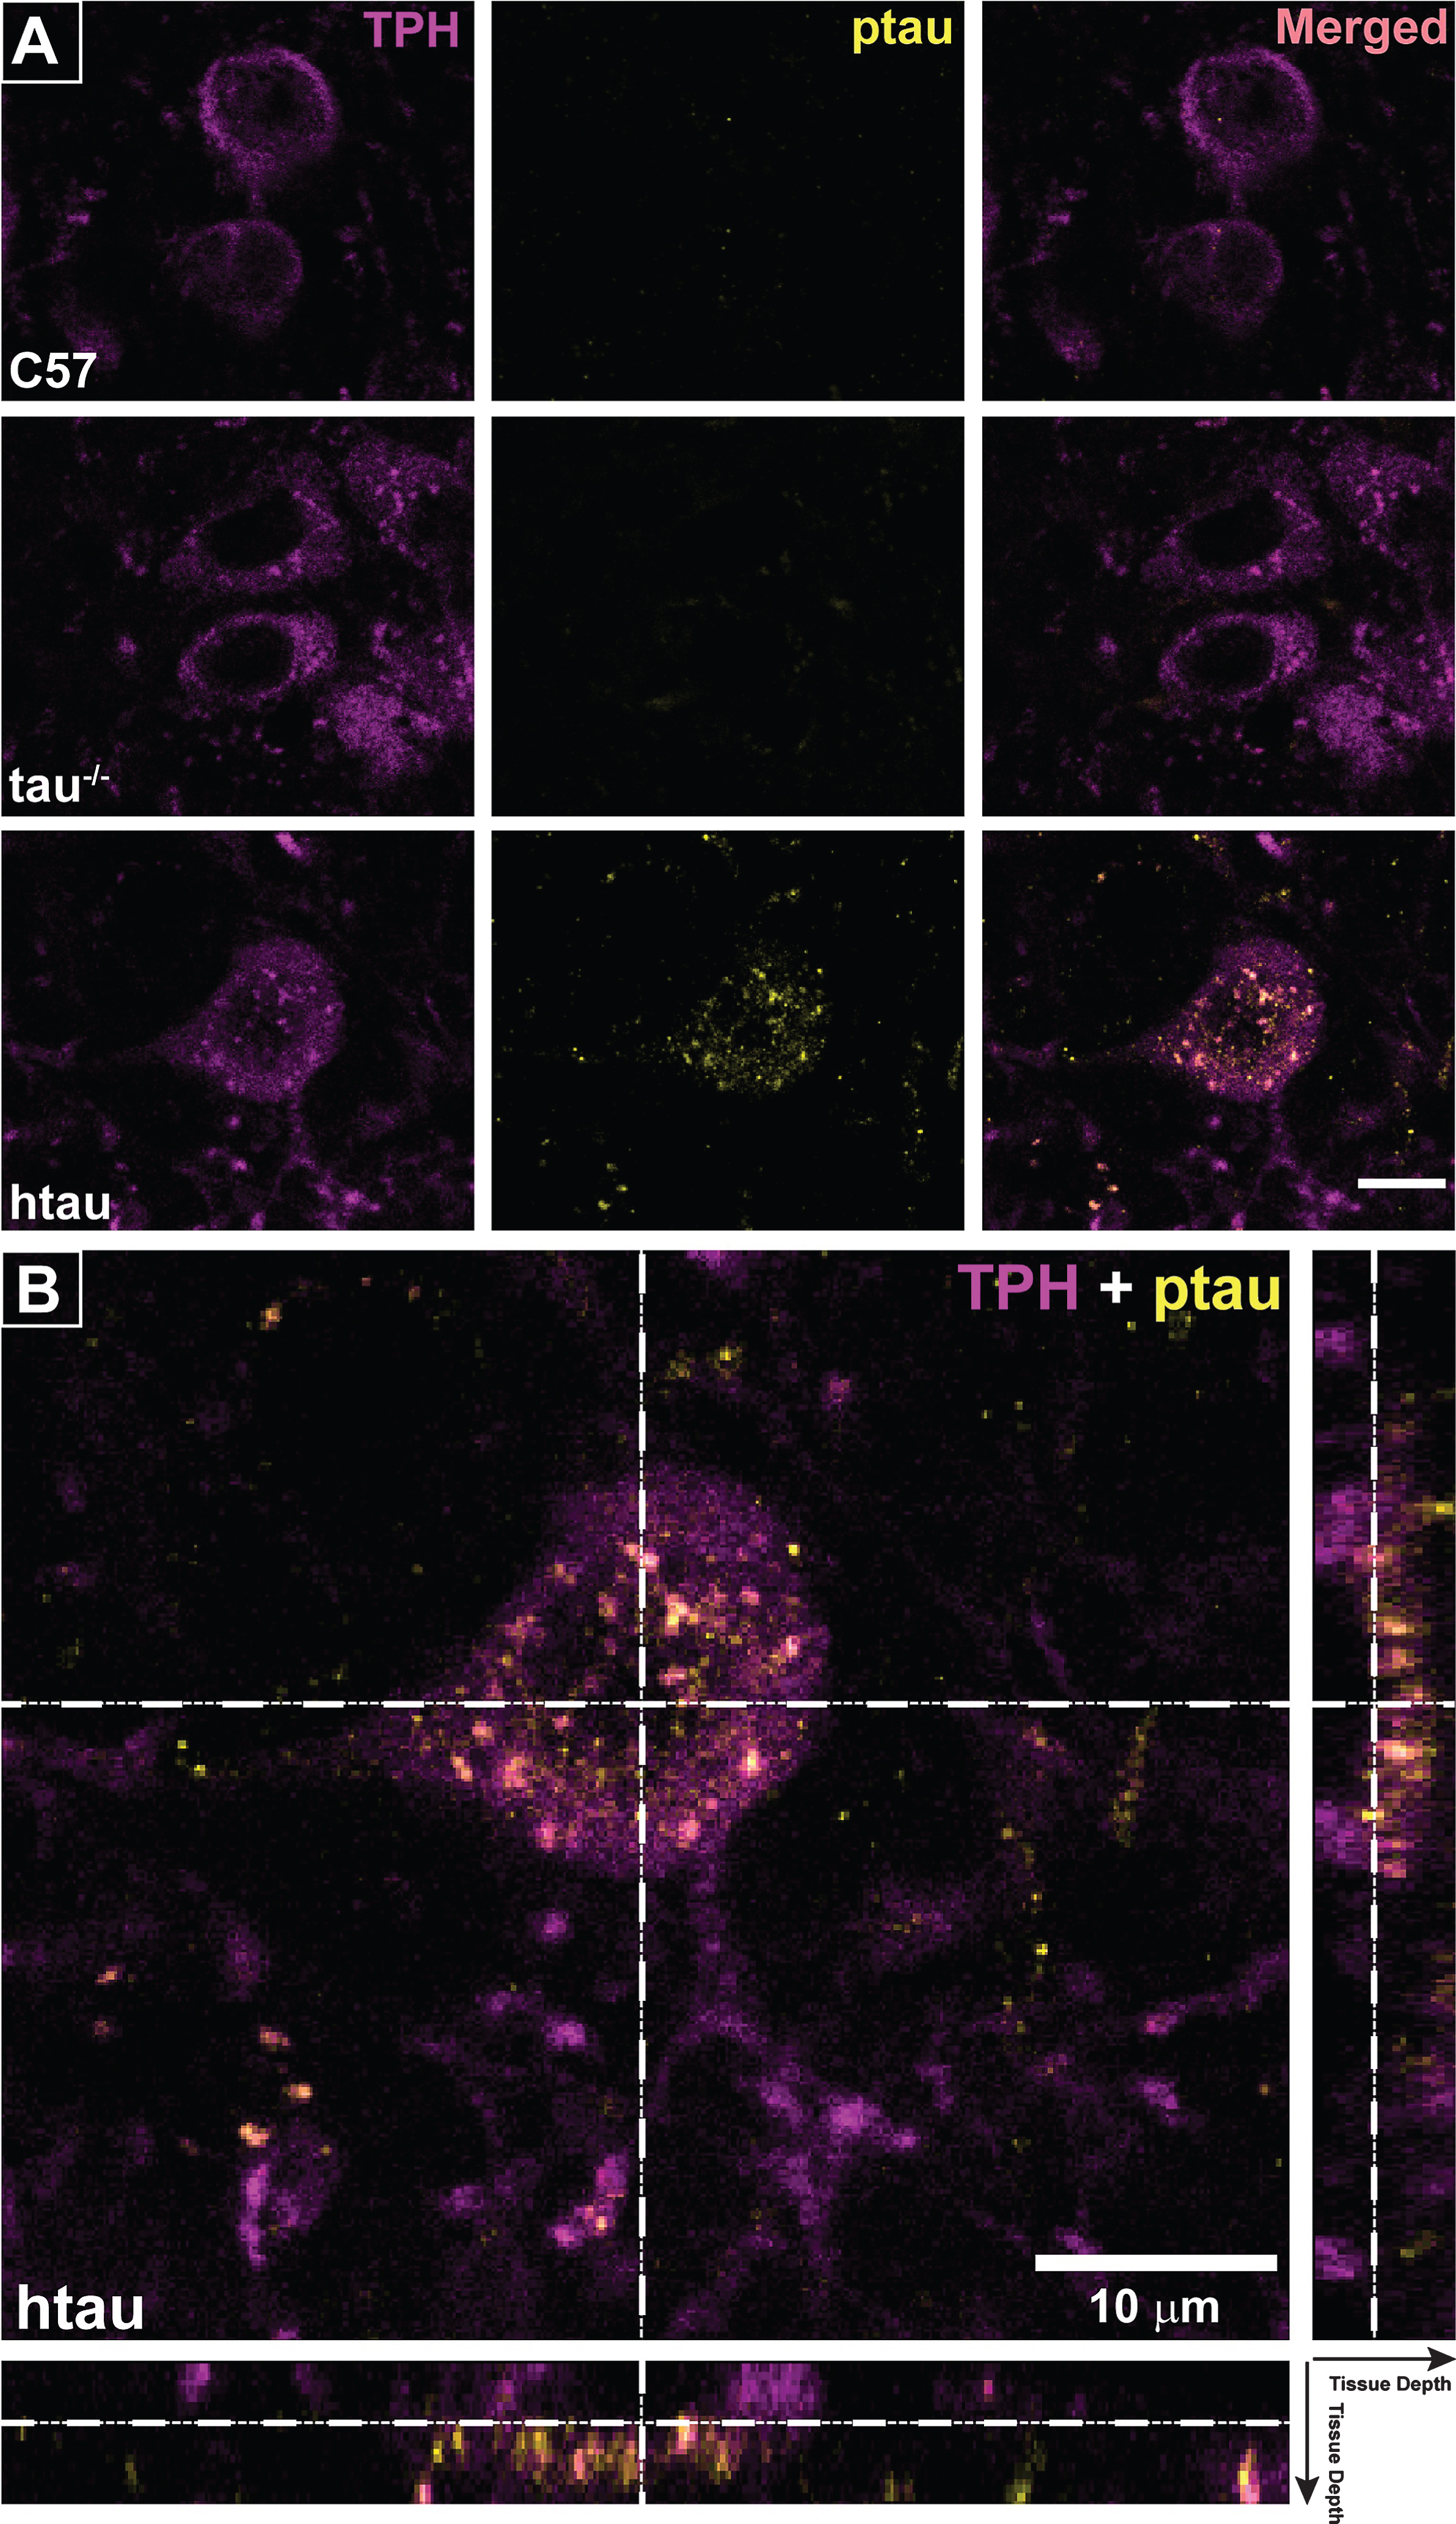 Co-localization of ptau-231 in tryptophan hydroxylase (TPH)-positive cells of 4-month-old htau DRN. A) Confocal images of single planes through rostral DRN at the level of the trochlear nuclei for C57, tau-/-, and htau mice. Phosphorylated tau (ptau) fluorescence is co-localized to TPH-positive cells in the htau section only. Scale bar = 10 μm. B) 3-D reconstruction of a TPH-positive cell in the htau DRN. Orthogonal views of the stack depict fluorescence label across tissue depth. Crosshairs (dashed lines) indicate the plane of section for the X, Y, and Z dimensions. The TPH-positive cell shows prominent ptau label in the cytoplasm of the soma with sparser puncta in TPH-positive processes.Scale bar = 10 μm.